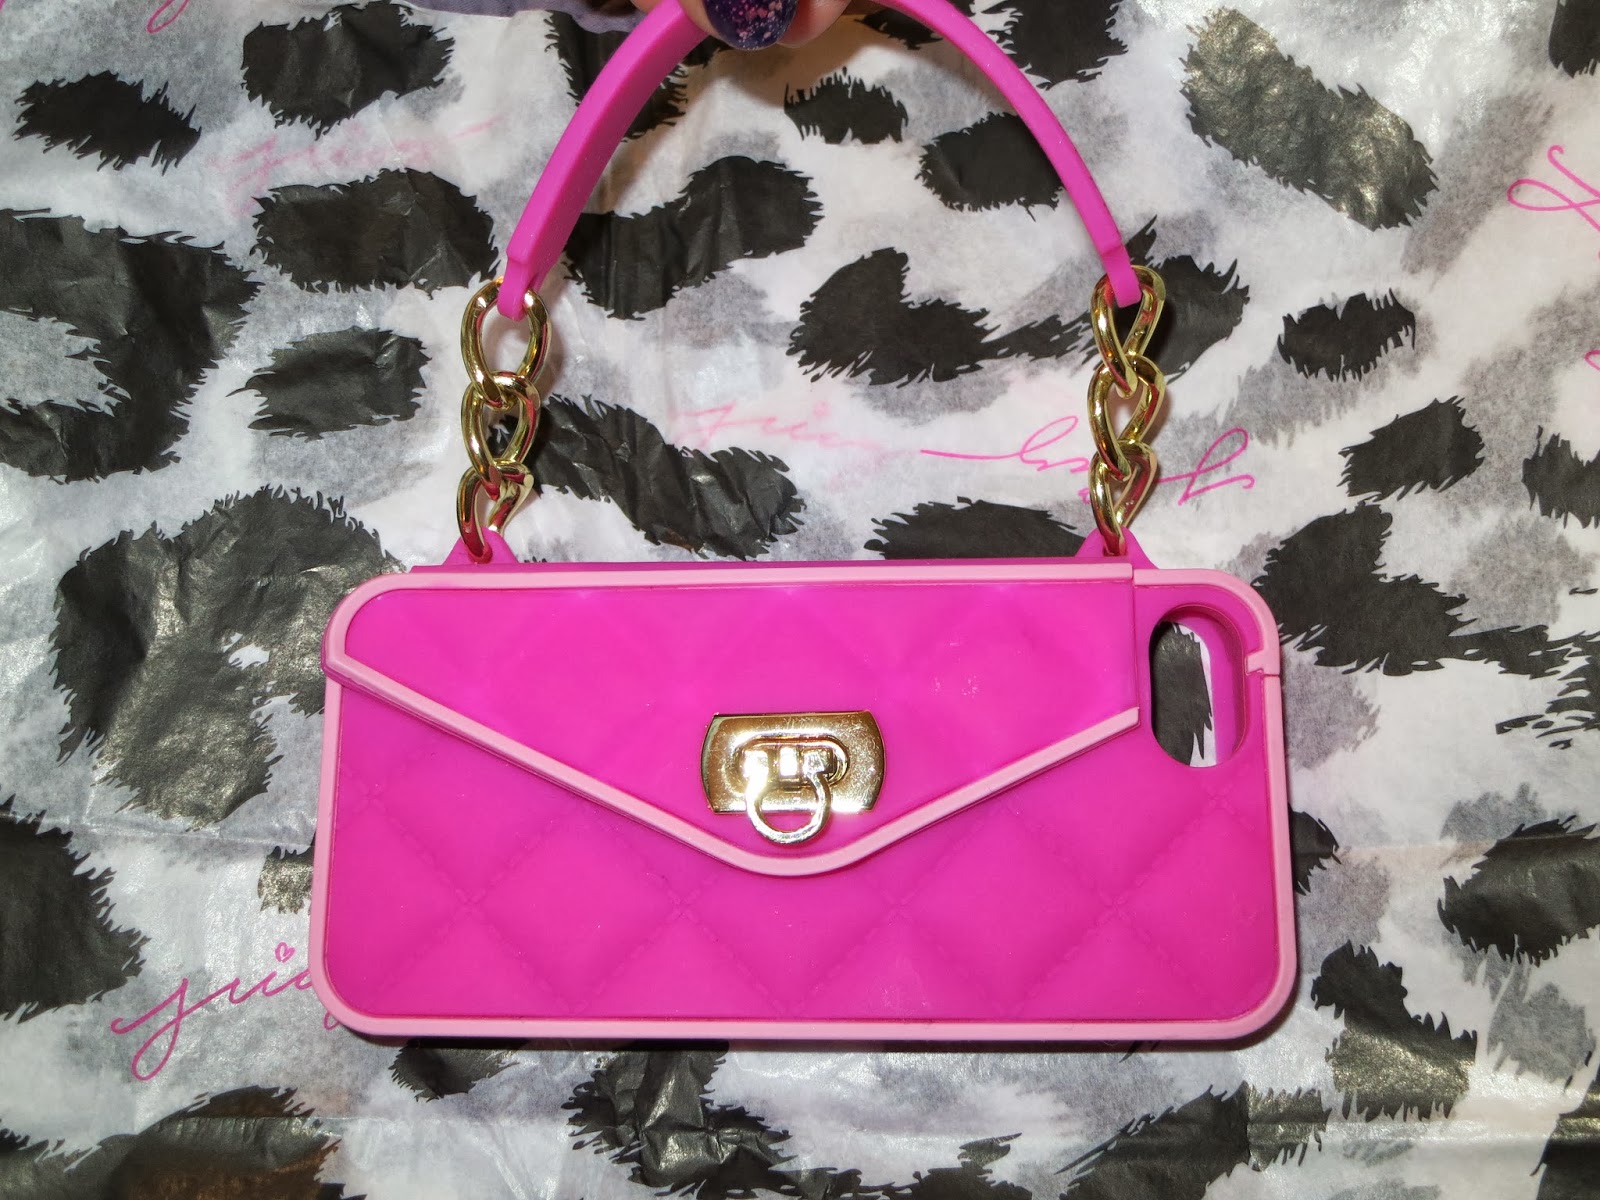 Ask Away Blog: Carry Your Phone in Style with Pursecase *Giveaway* Ends 1/29